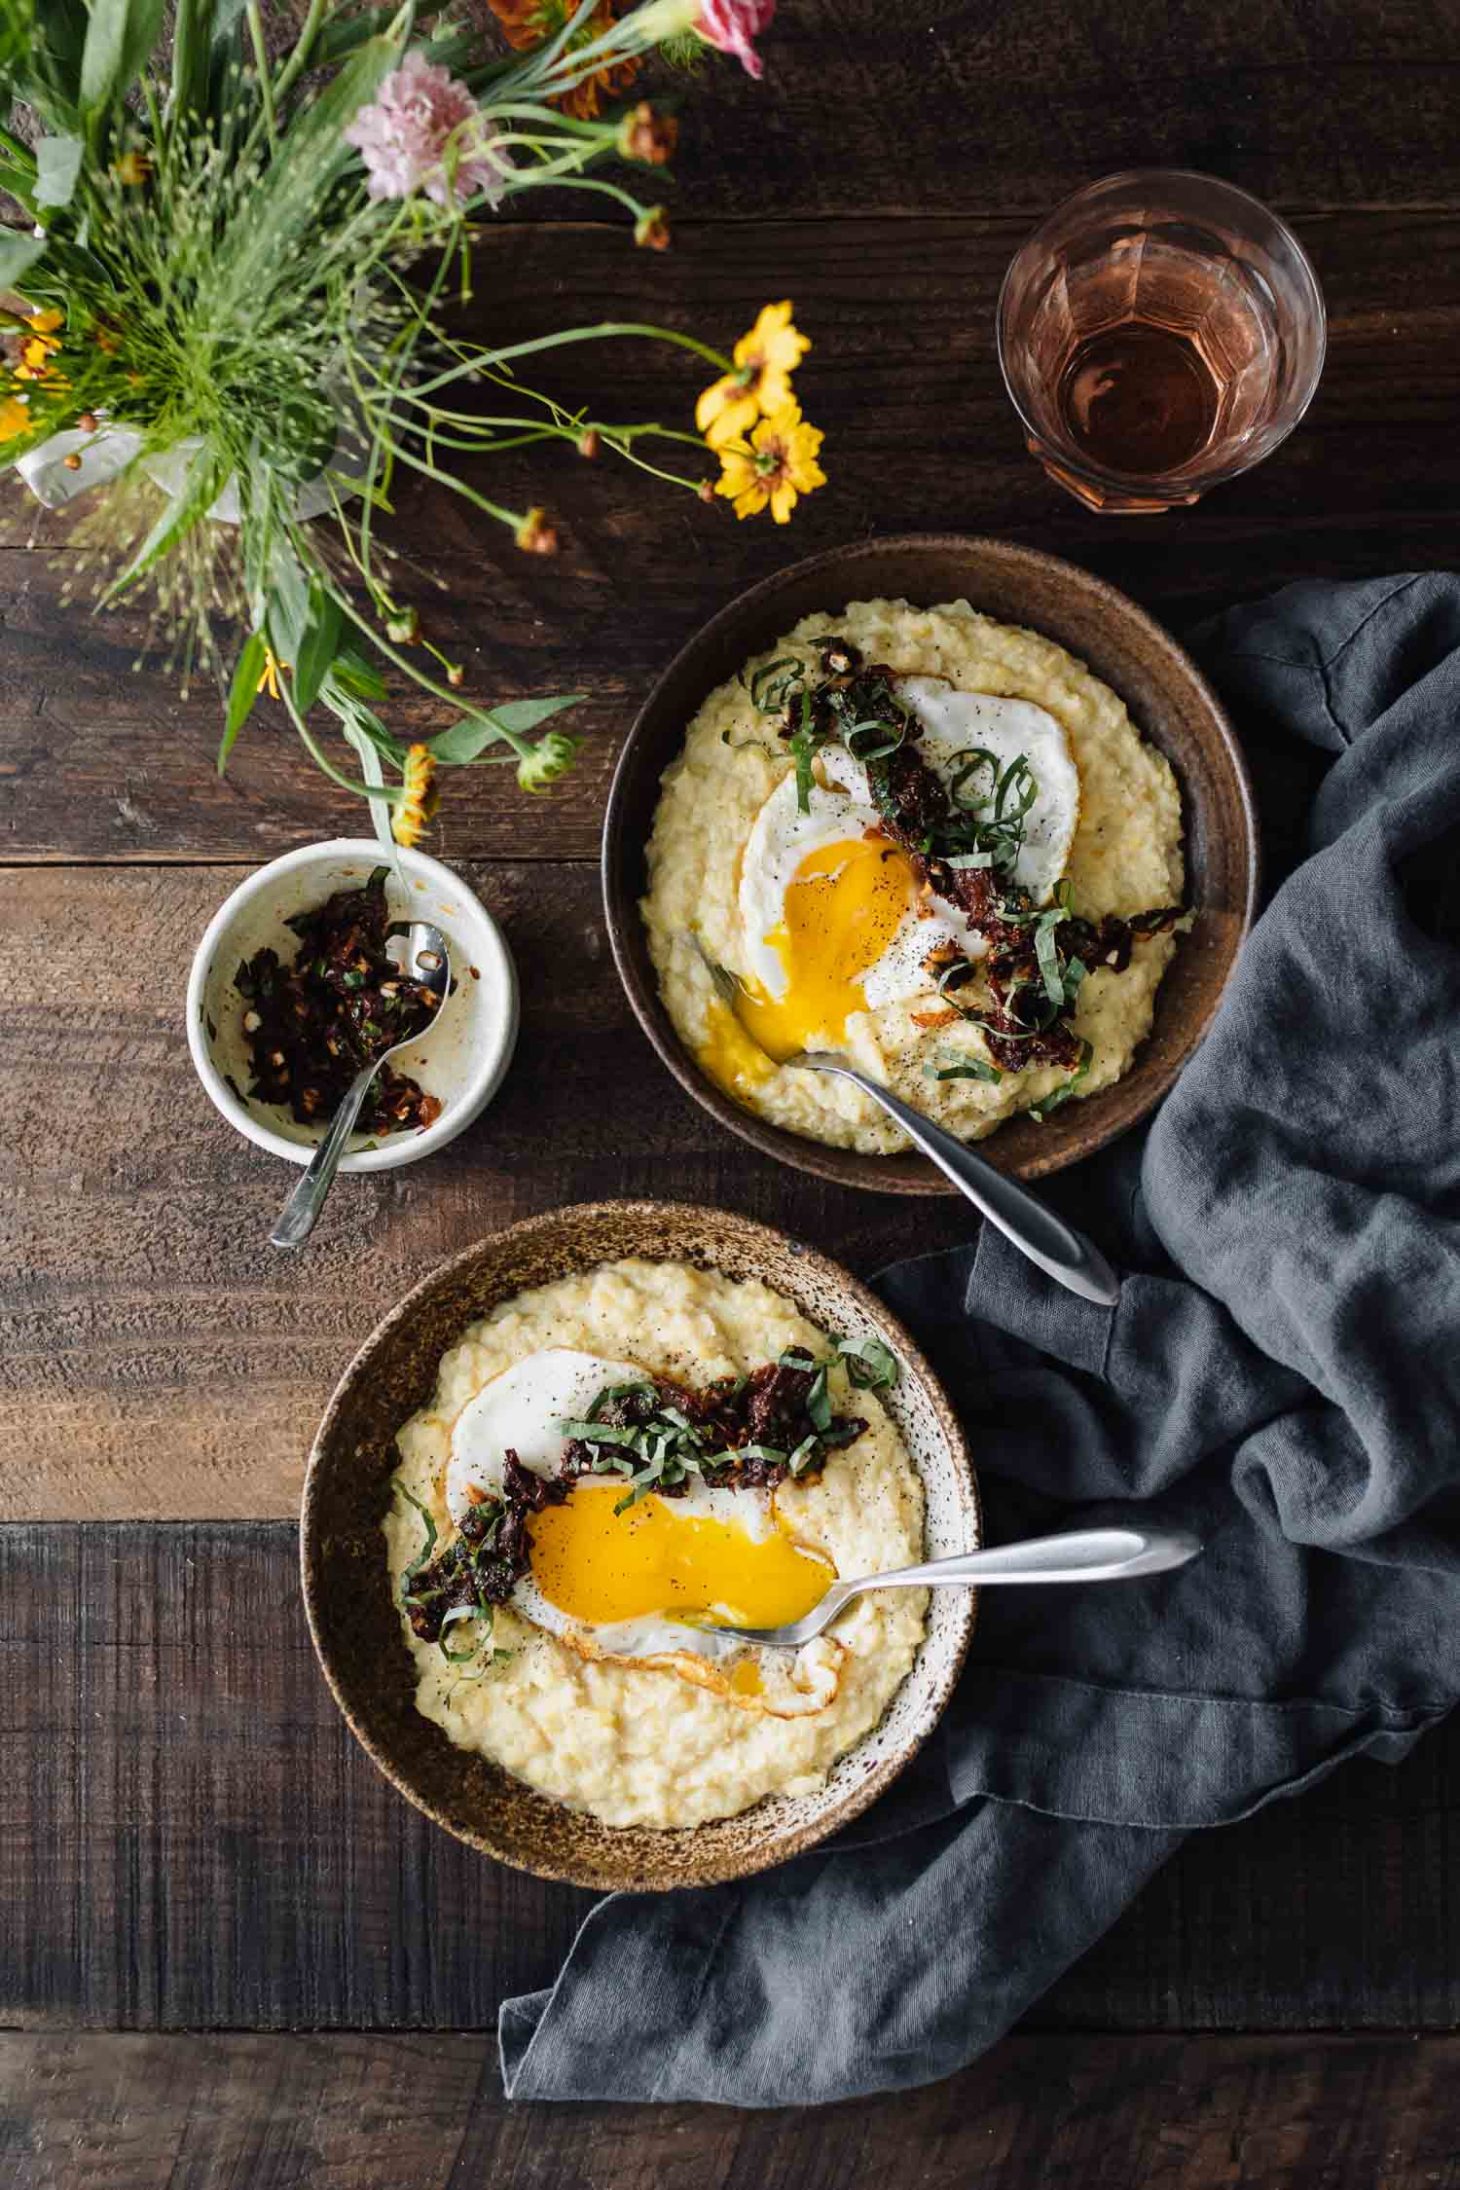 Sweet Corn Polenta with Fried Egg and Sun-Dried Tomato Relish